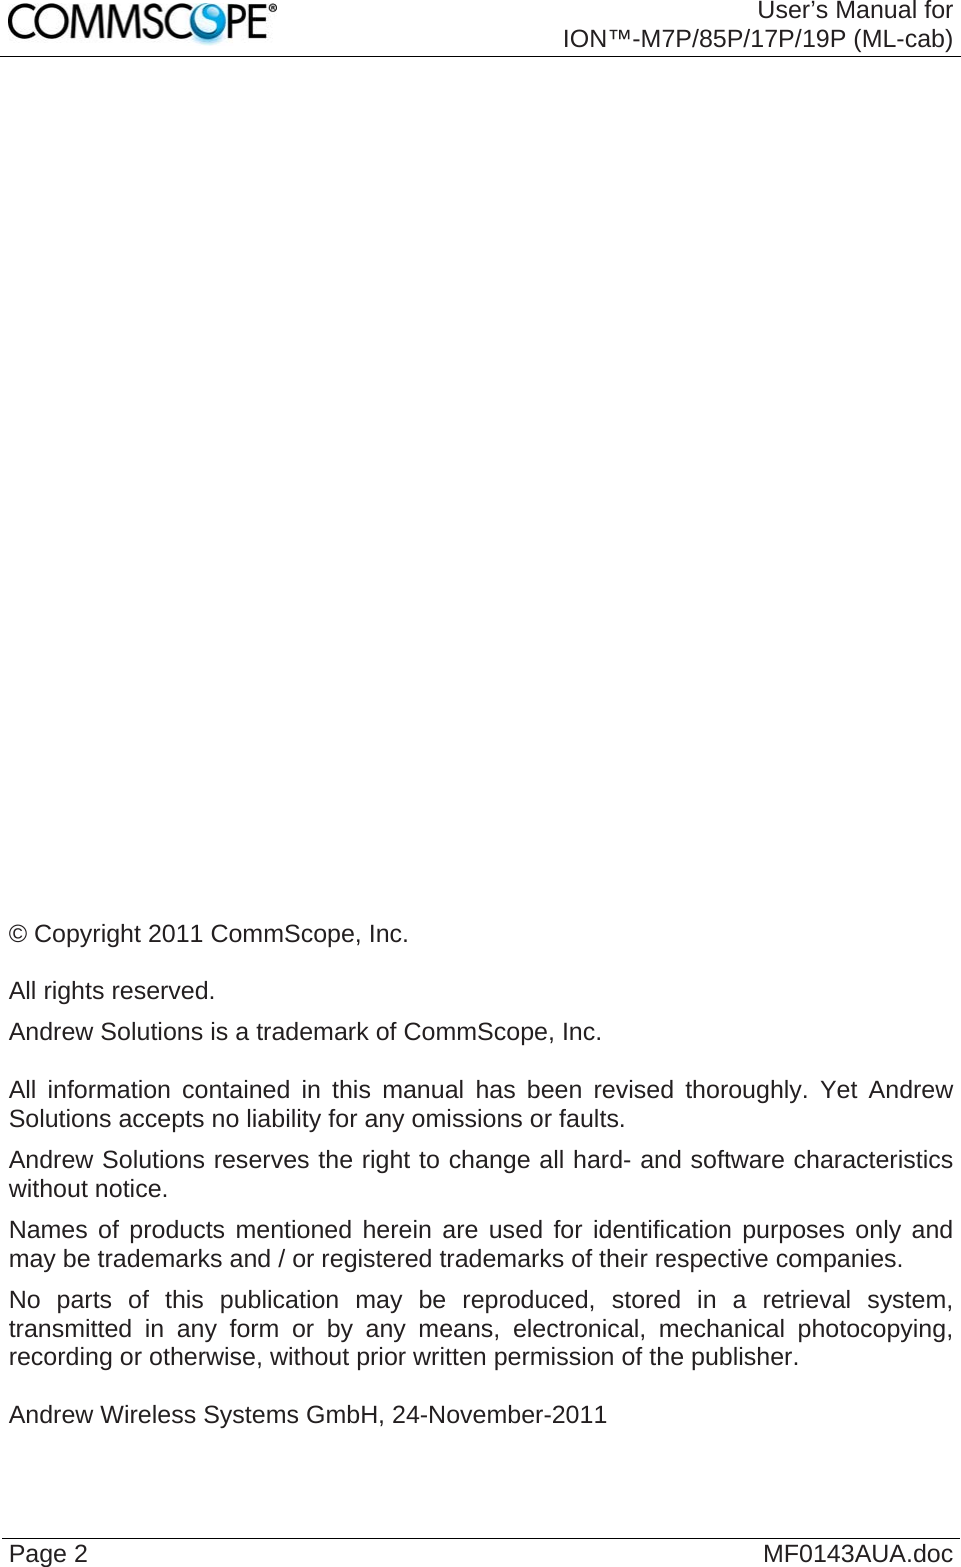  User’s Manual for ION™-M7P/85P/17P/19P (ML-cab) Page 2  MF0143AUA.doc                              © Copyright 2011 CommScope, Inc.  All rights reserved. Andrew Solutions is a trademark of CommScope, Inc.  All information contained in this manual has been revised thoroughly. Yet Andrew Solutions accepts no liability for any omissions or faults. Andrew Solutions reserves the right to change all hard- and software characteristics without notice. Names of products mentioned herein are used for identification purposes only and may be trademarks and / or registered trademarks of their respective companies. No parts of this publication may be reproduced, stored in a retrieval system, transmitted in any form or by any means, electronical, mechanical photocopying, recording or otherwise, without prior written permission of the publisher.  Andrew Wireless Systems GmbH, 24-November-2011 